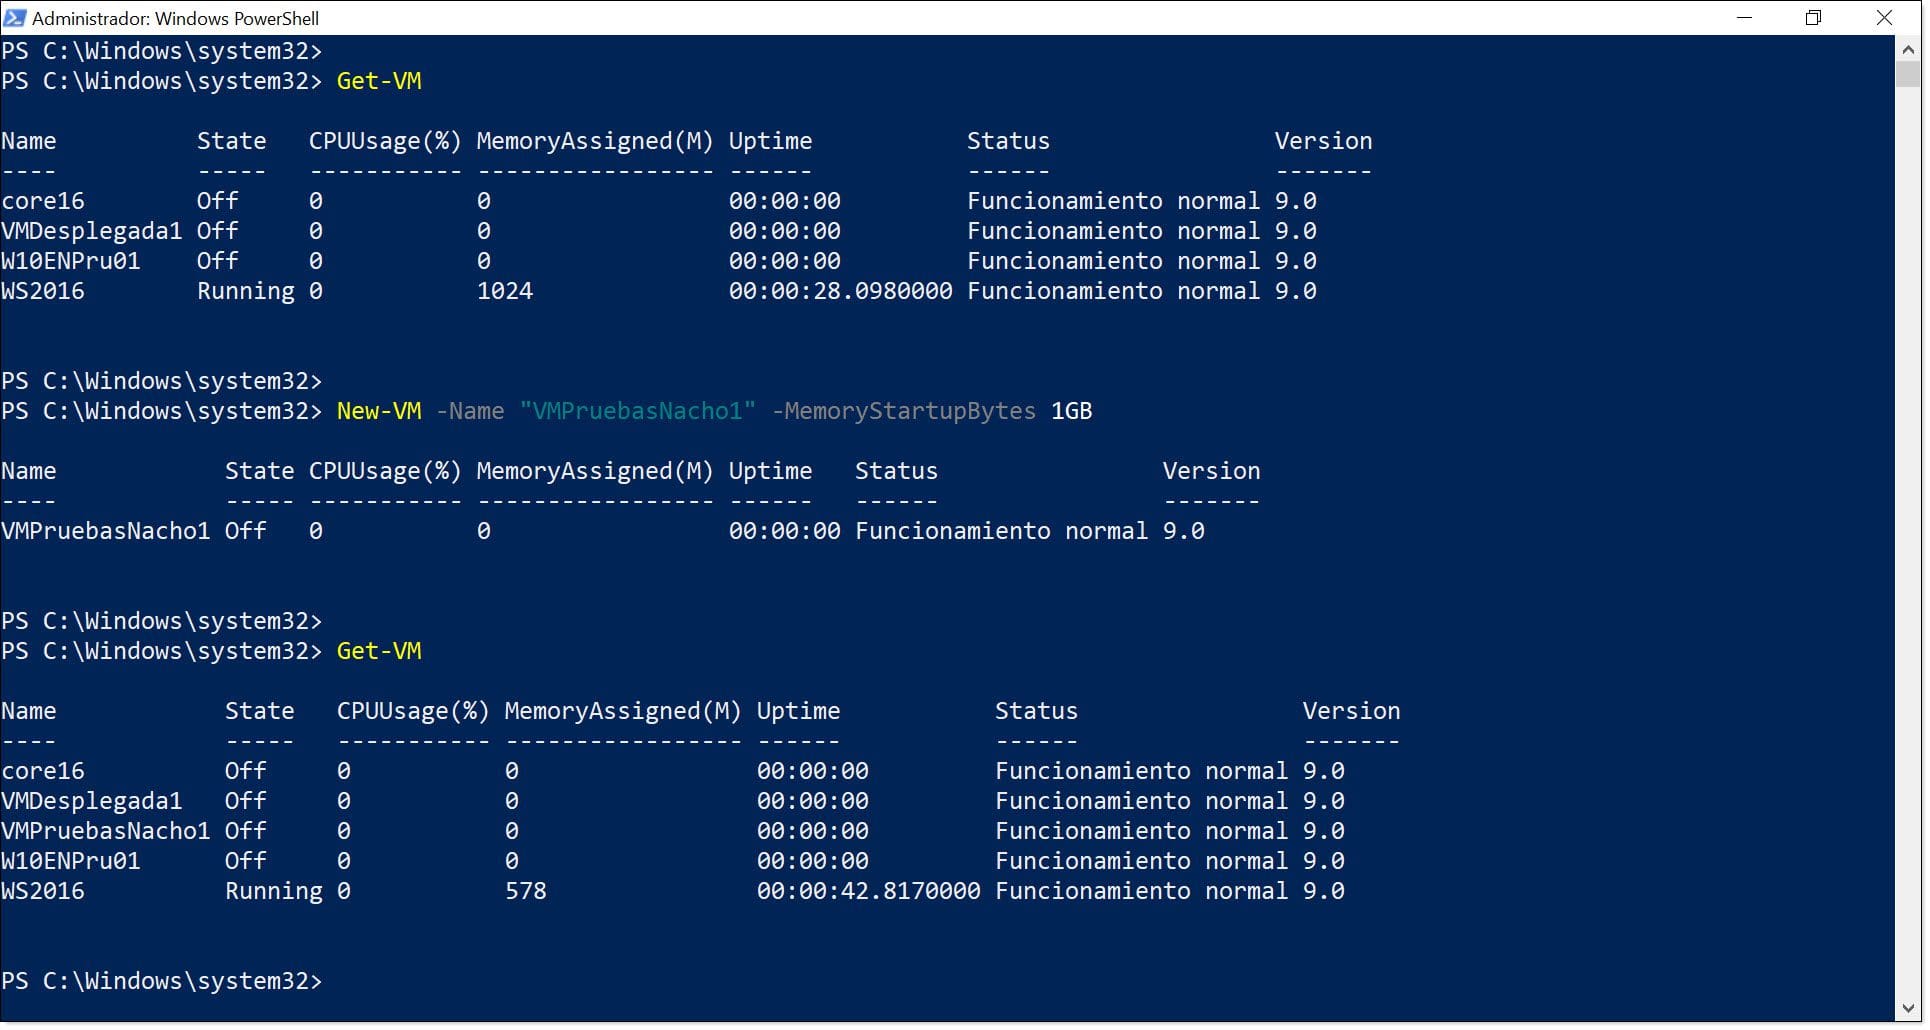 Image - PowerShell command to deploy a simple VM